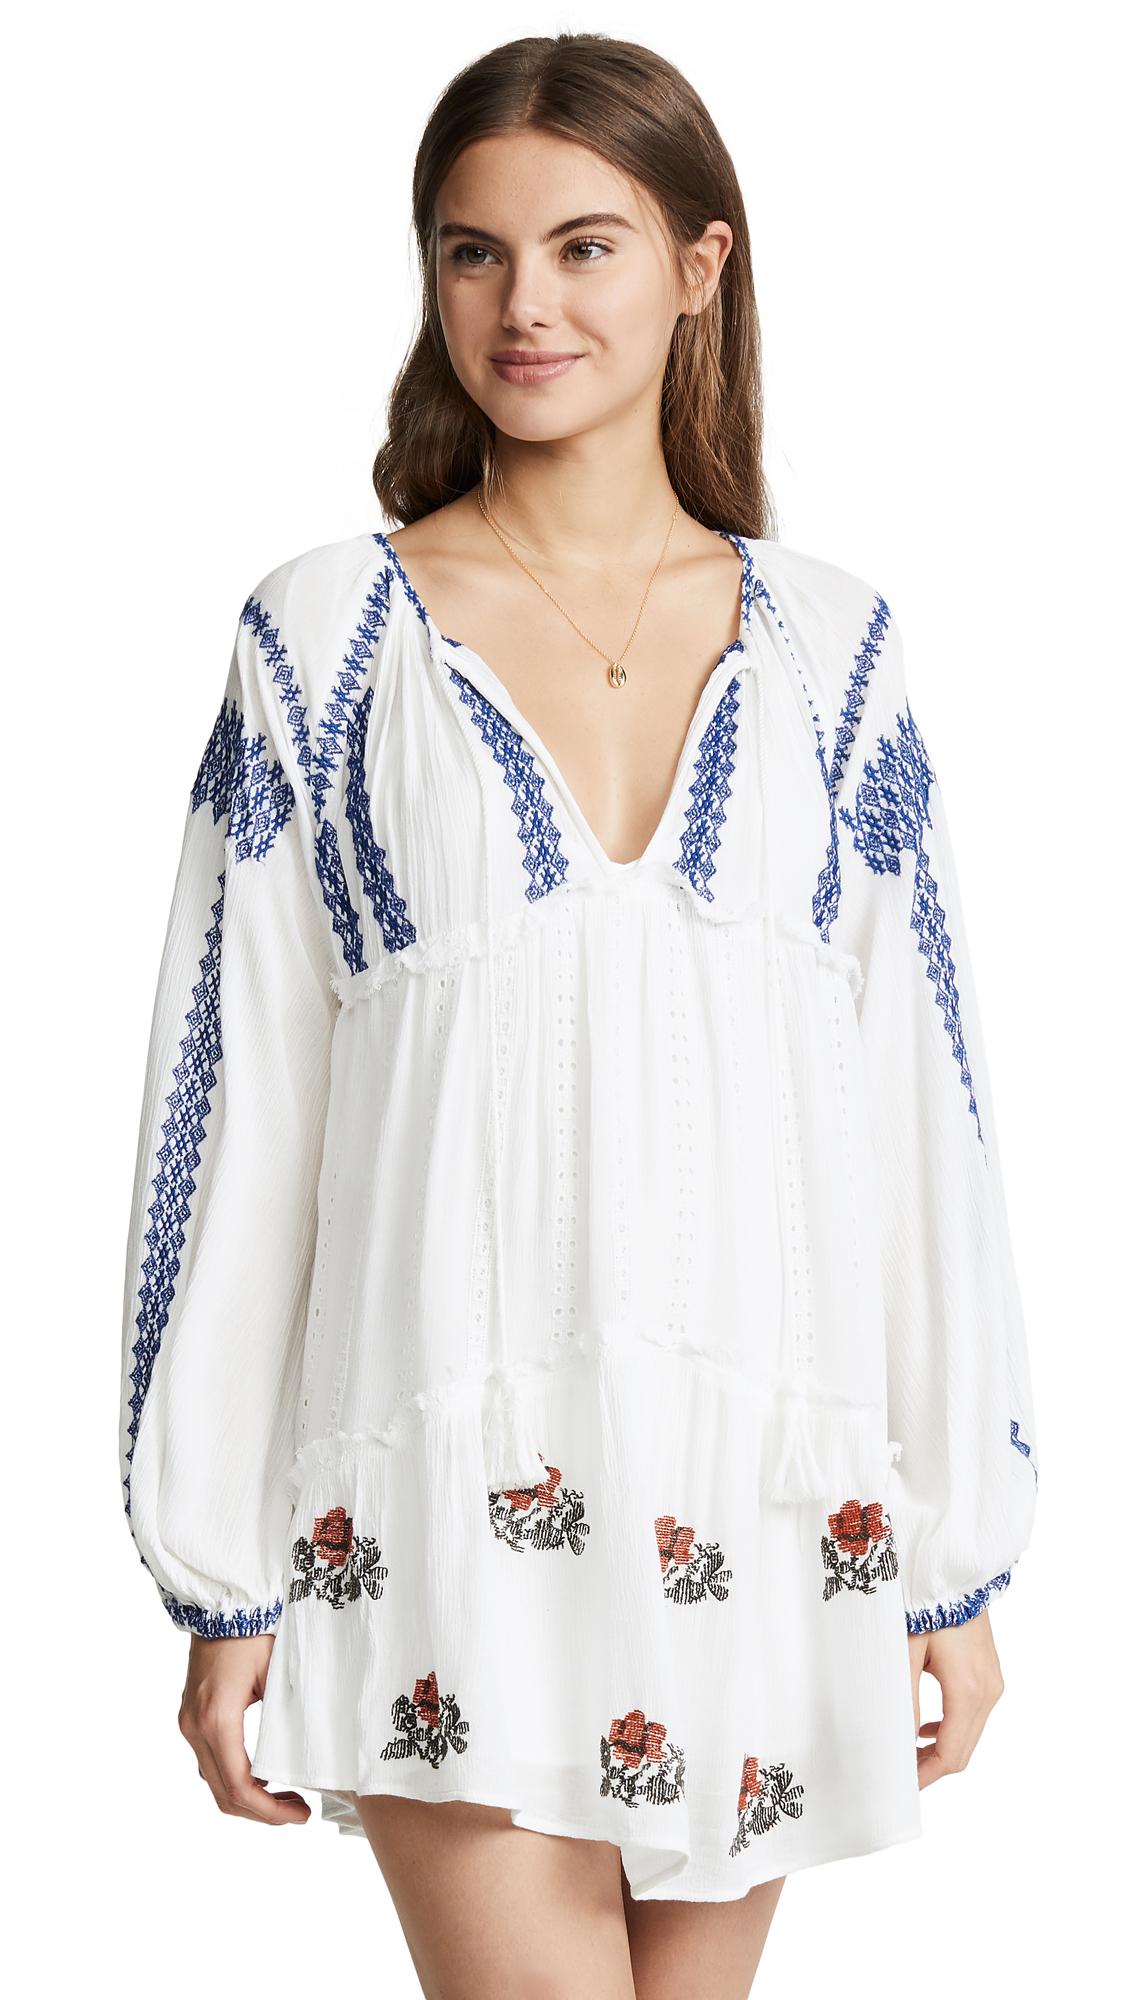 Free People Wild Horses Embroidered Mini Dress in Ivory (White) - Lyst